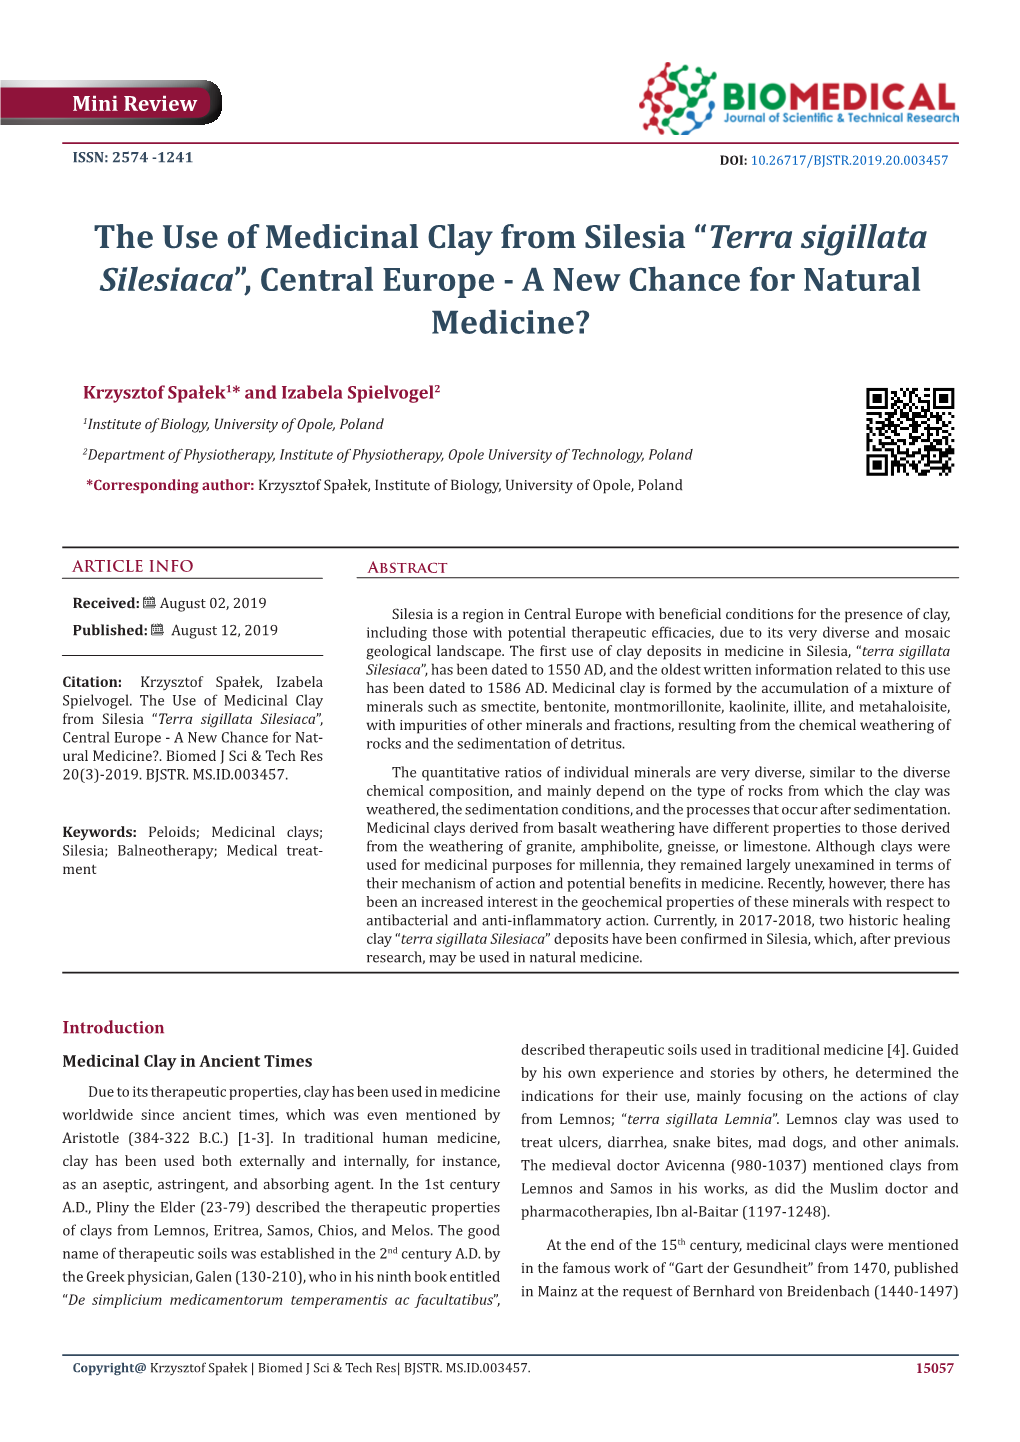 The Use of Medicinal Clay from Silesia “Terra Sigillata Silesiaca”, Central Europe - a New Chance for Natural Medicine?